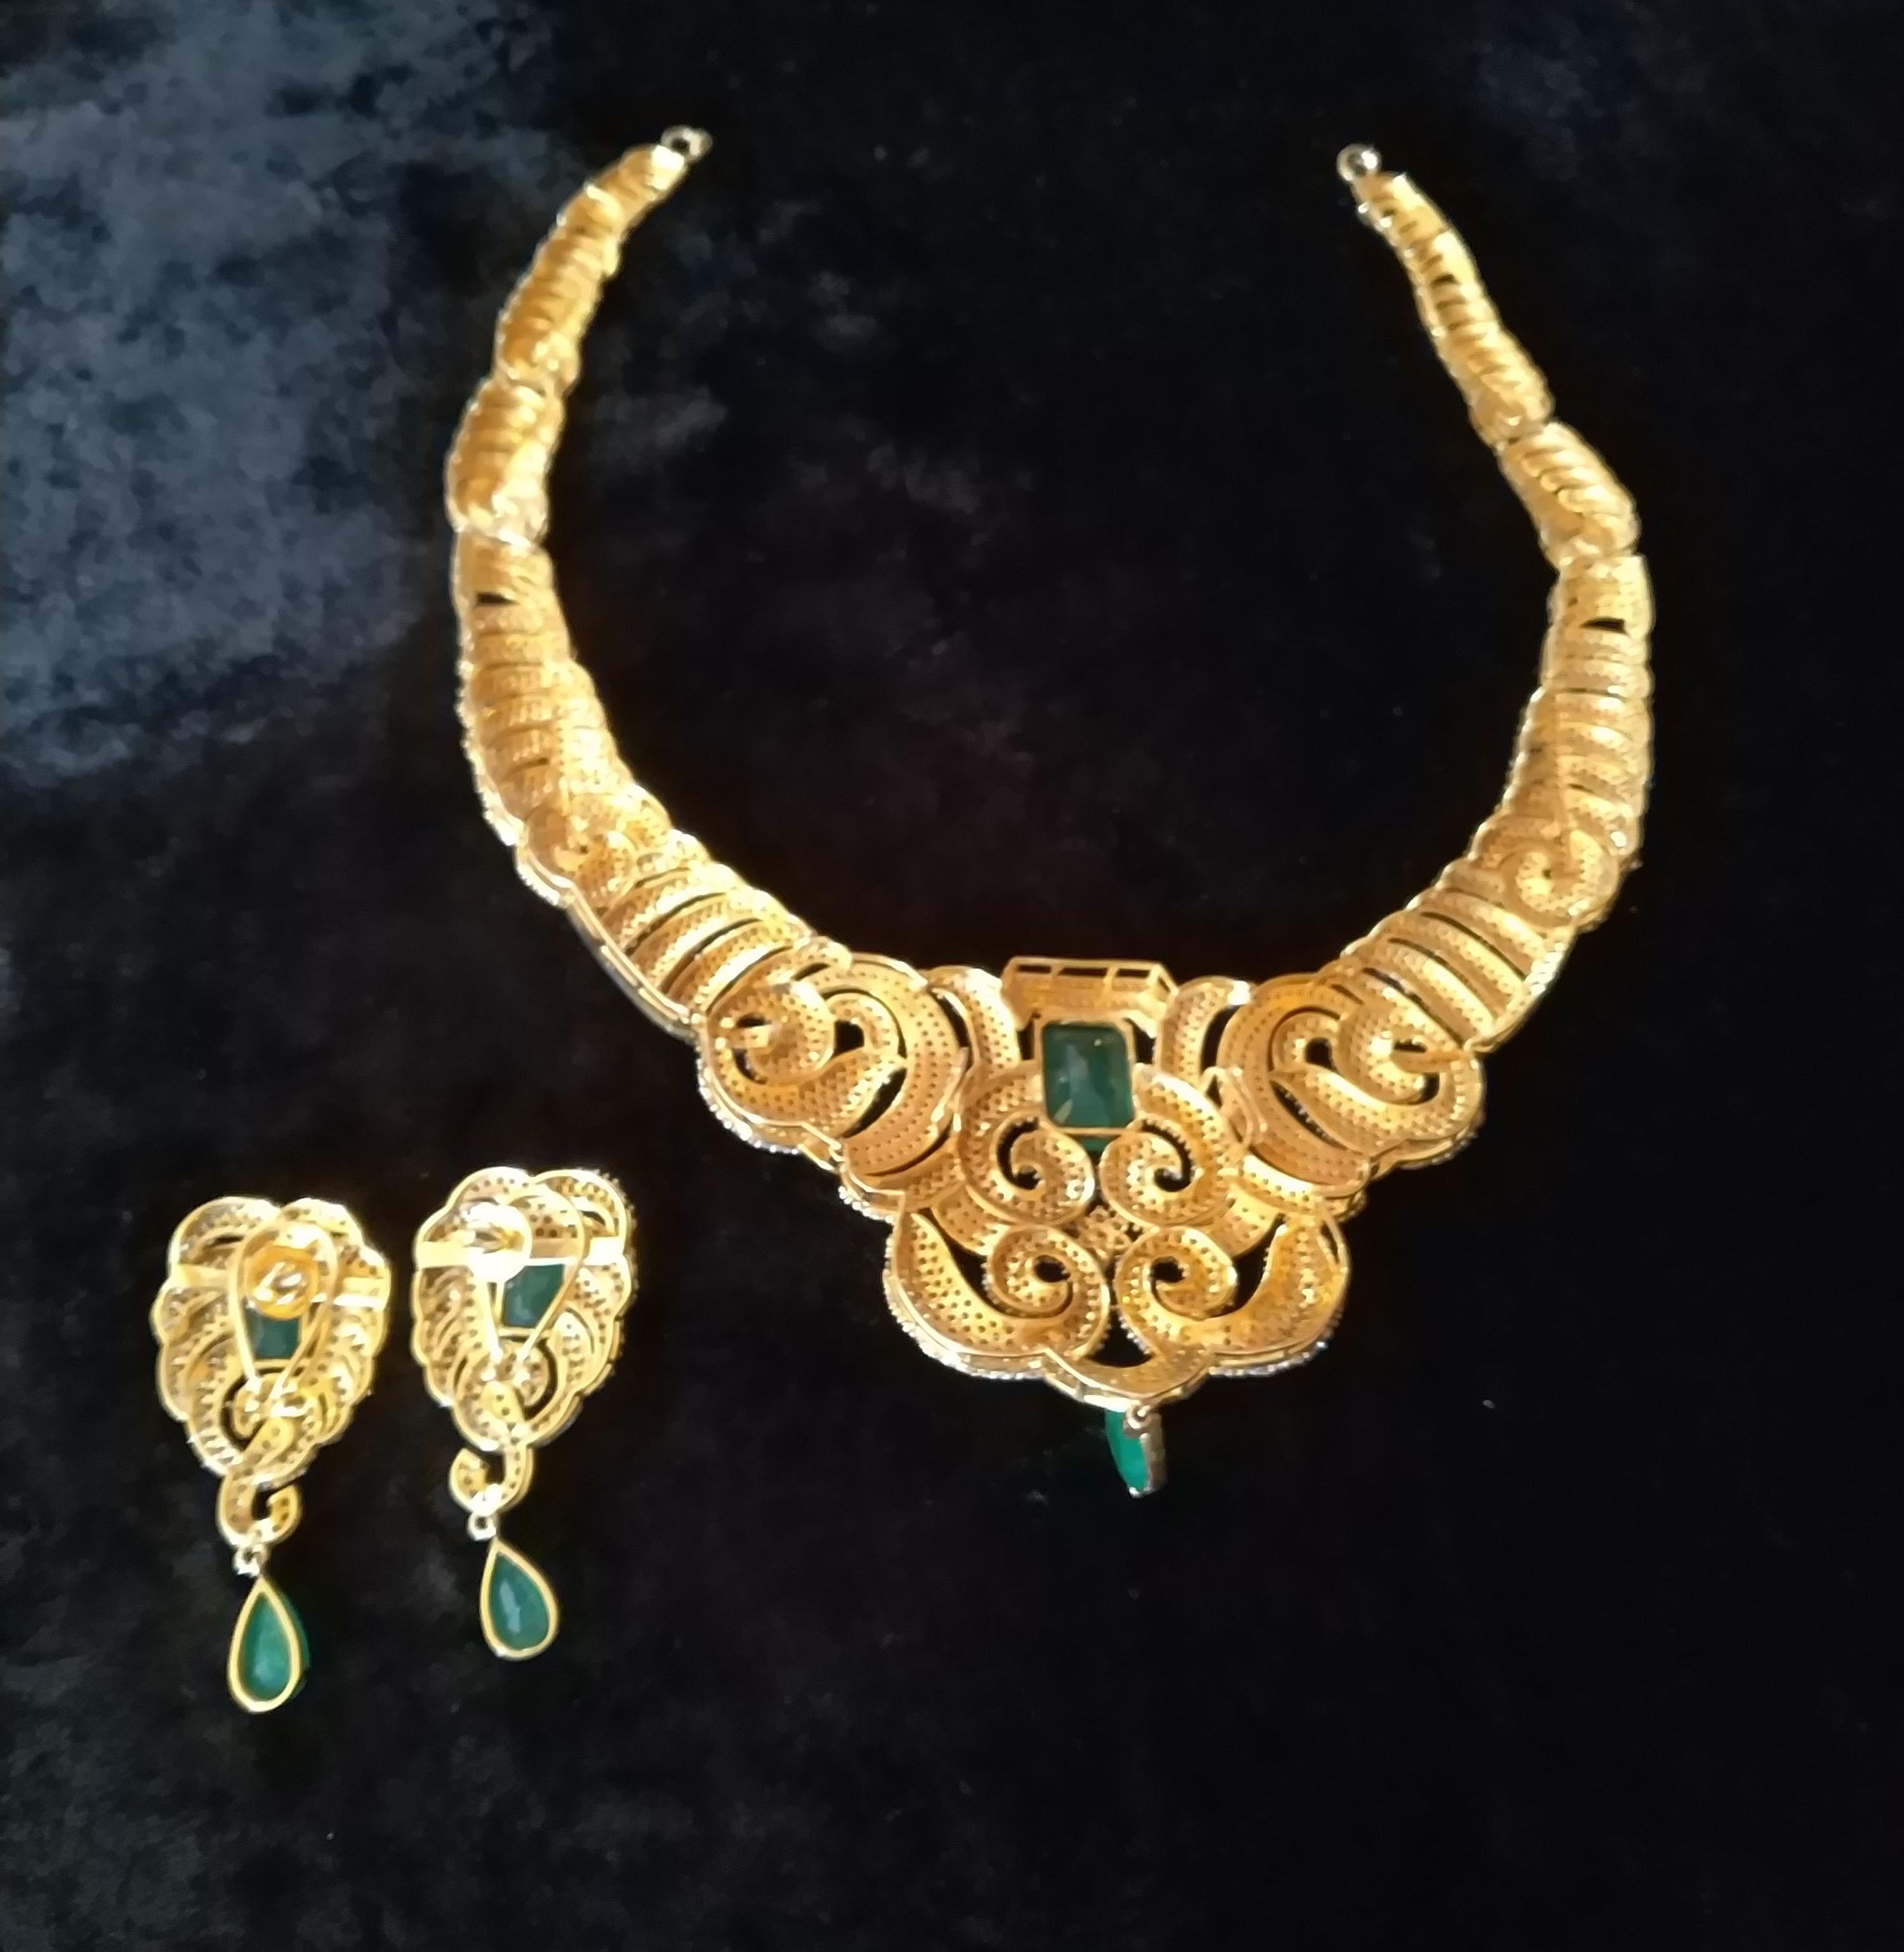 42 Carat Diamonds and 25 Carat Emerald Necklace and Earrings Set For Sale 4